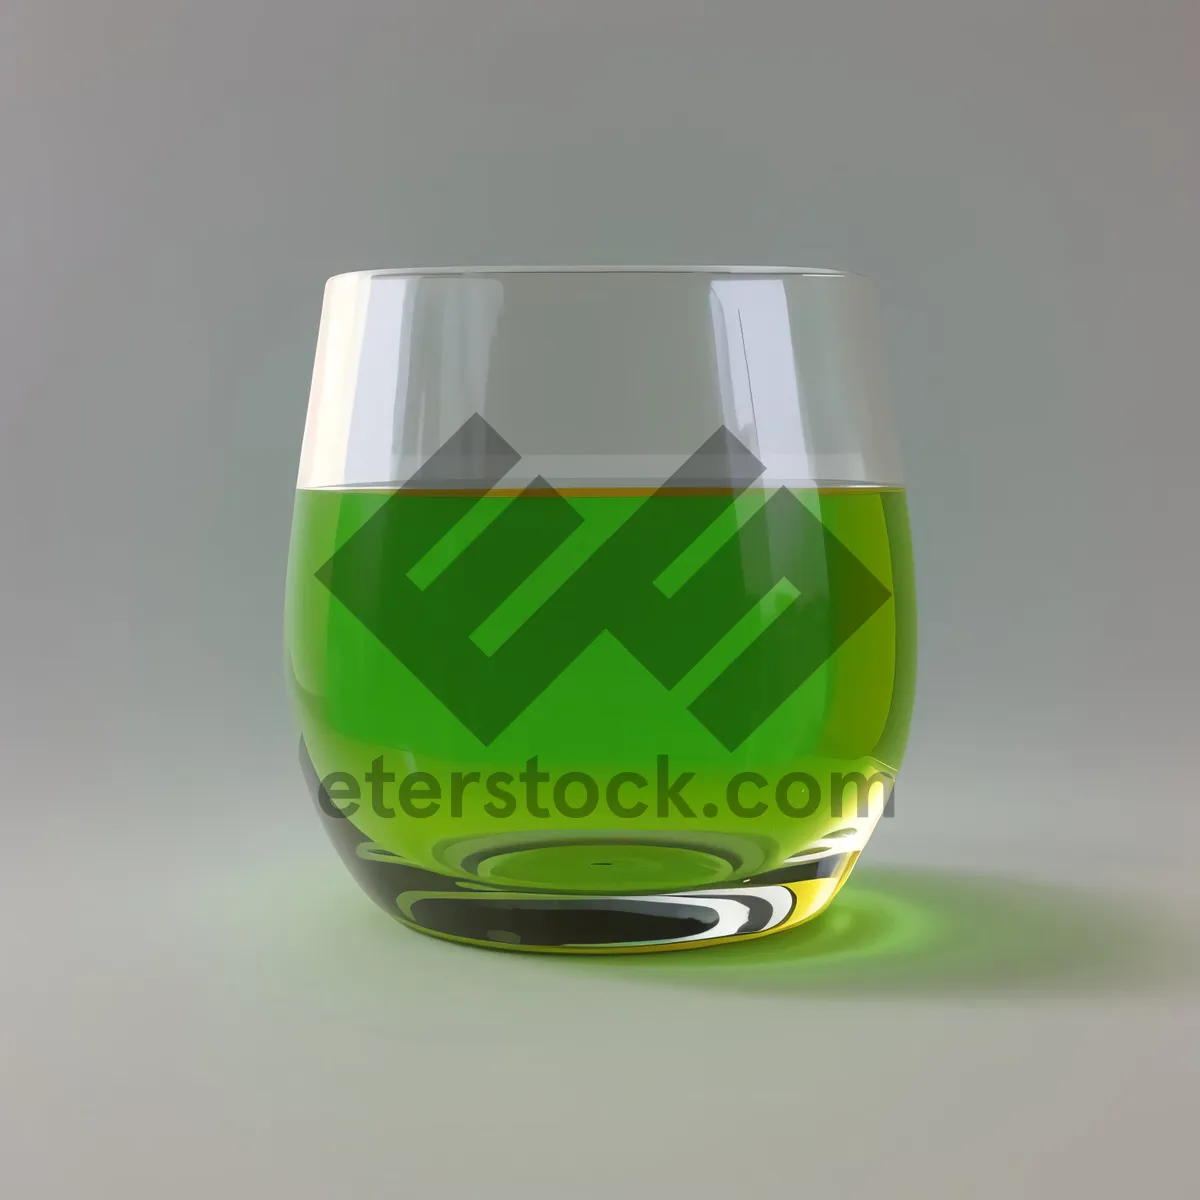 Picture of Party-Ready Glassware Collection for Restaurants and Bars